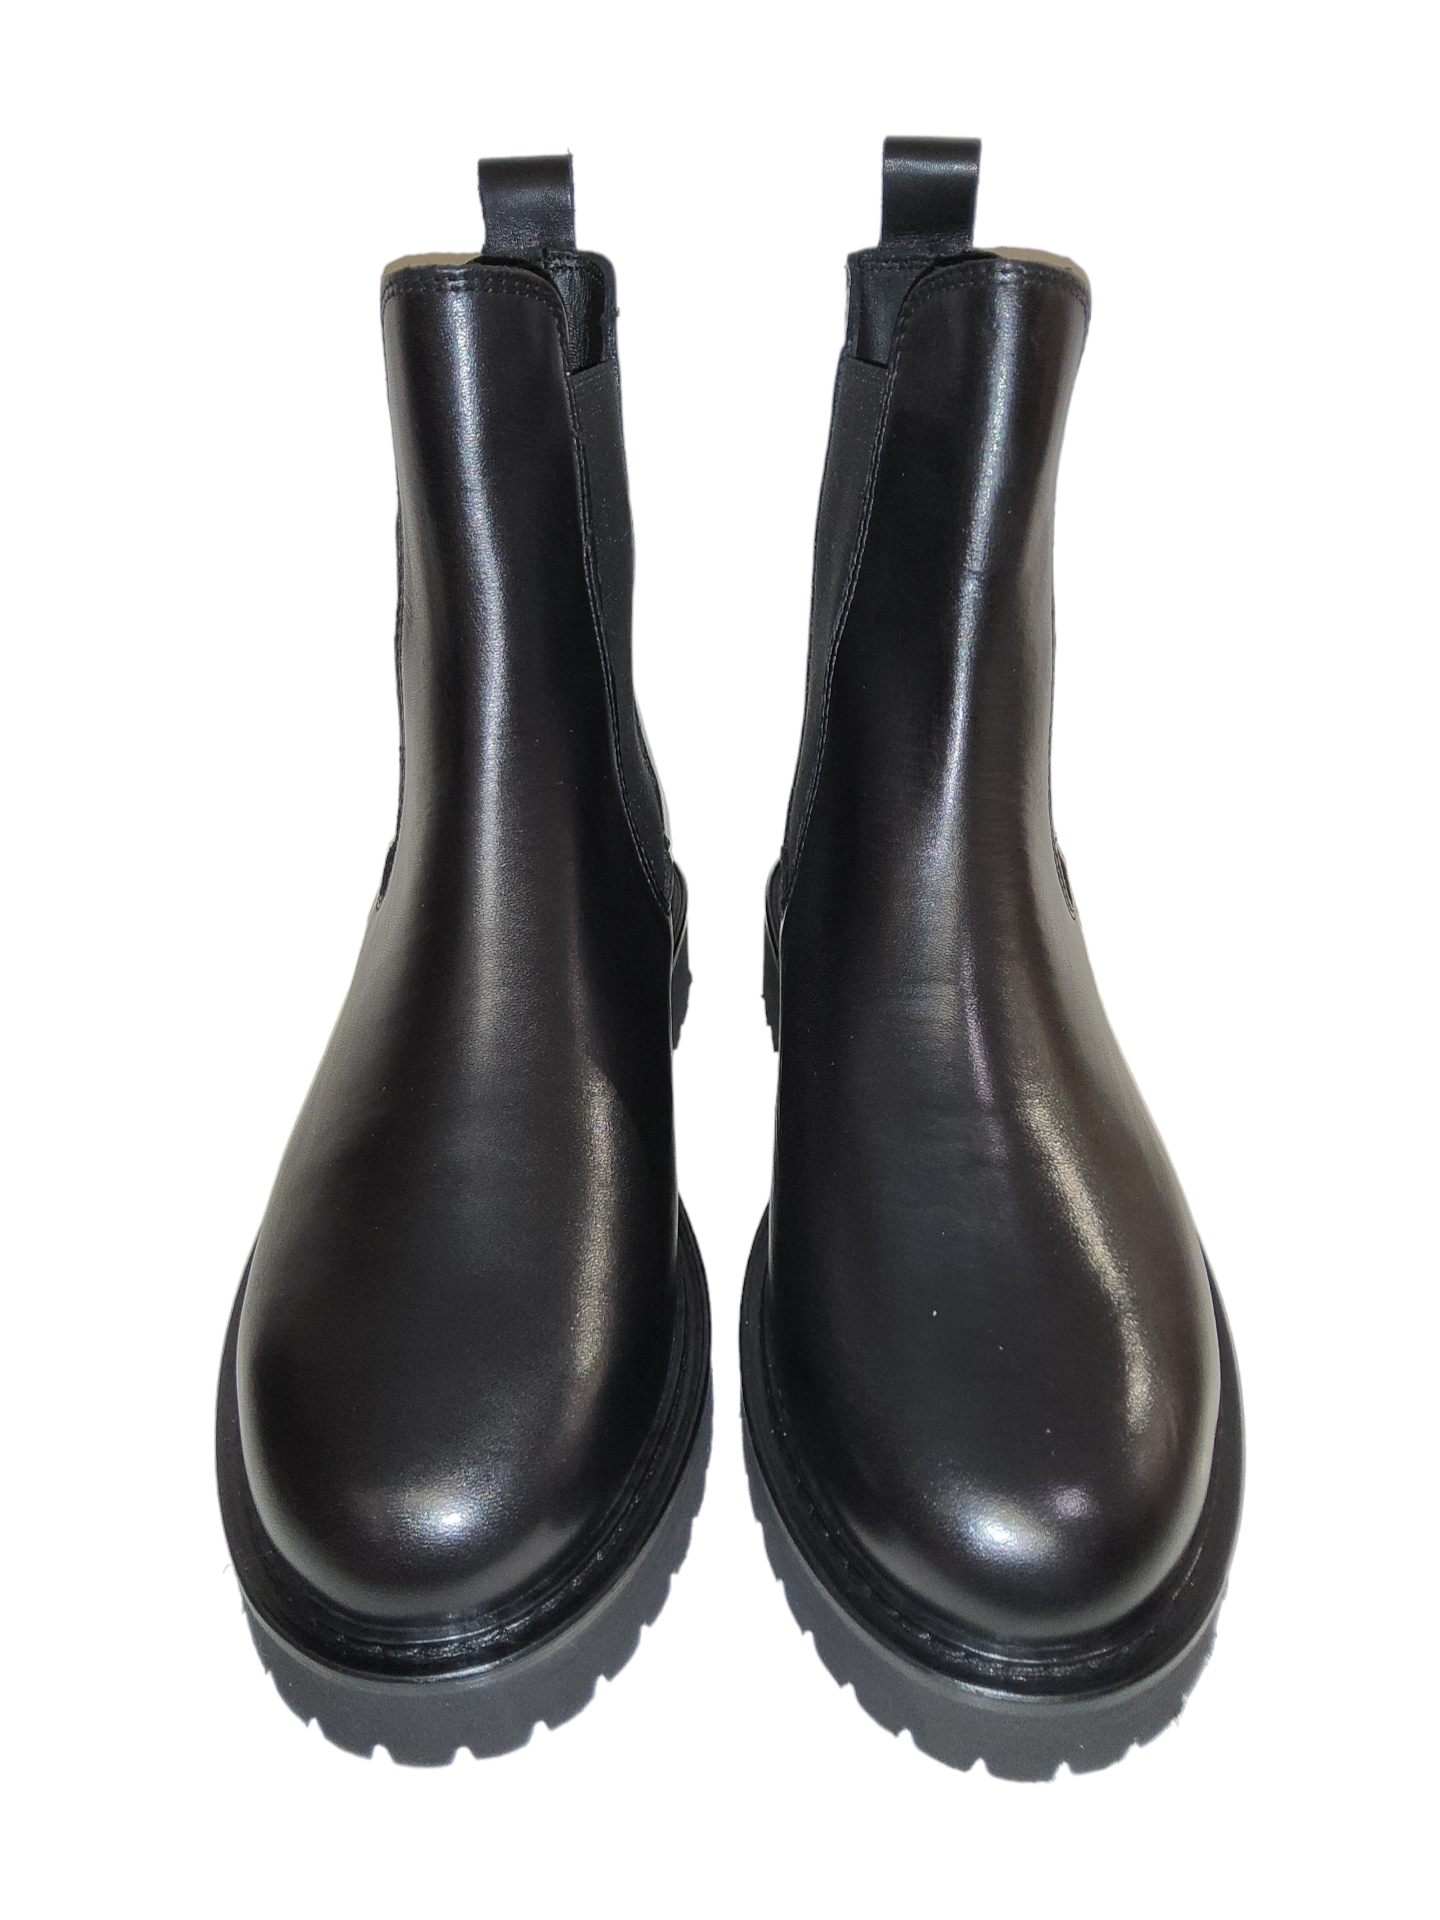 Black leather Chelsea boot